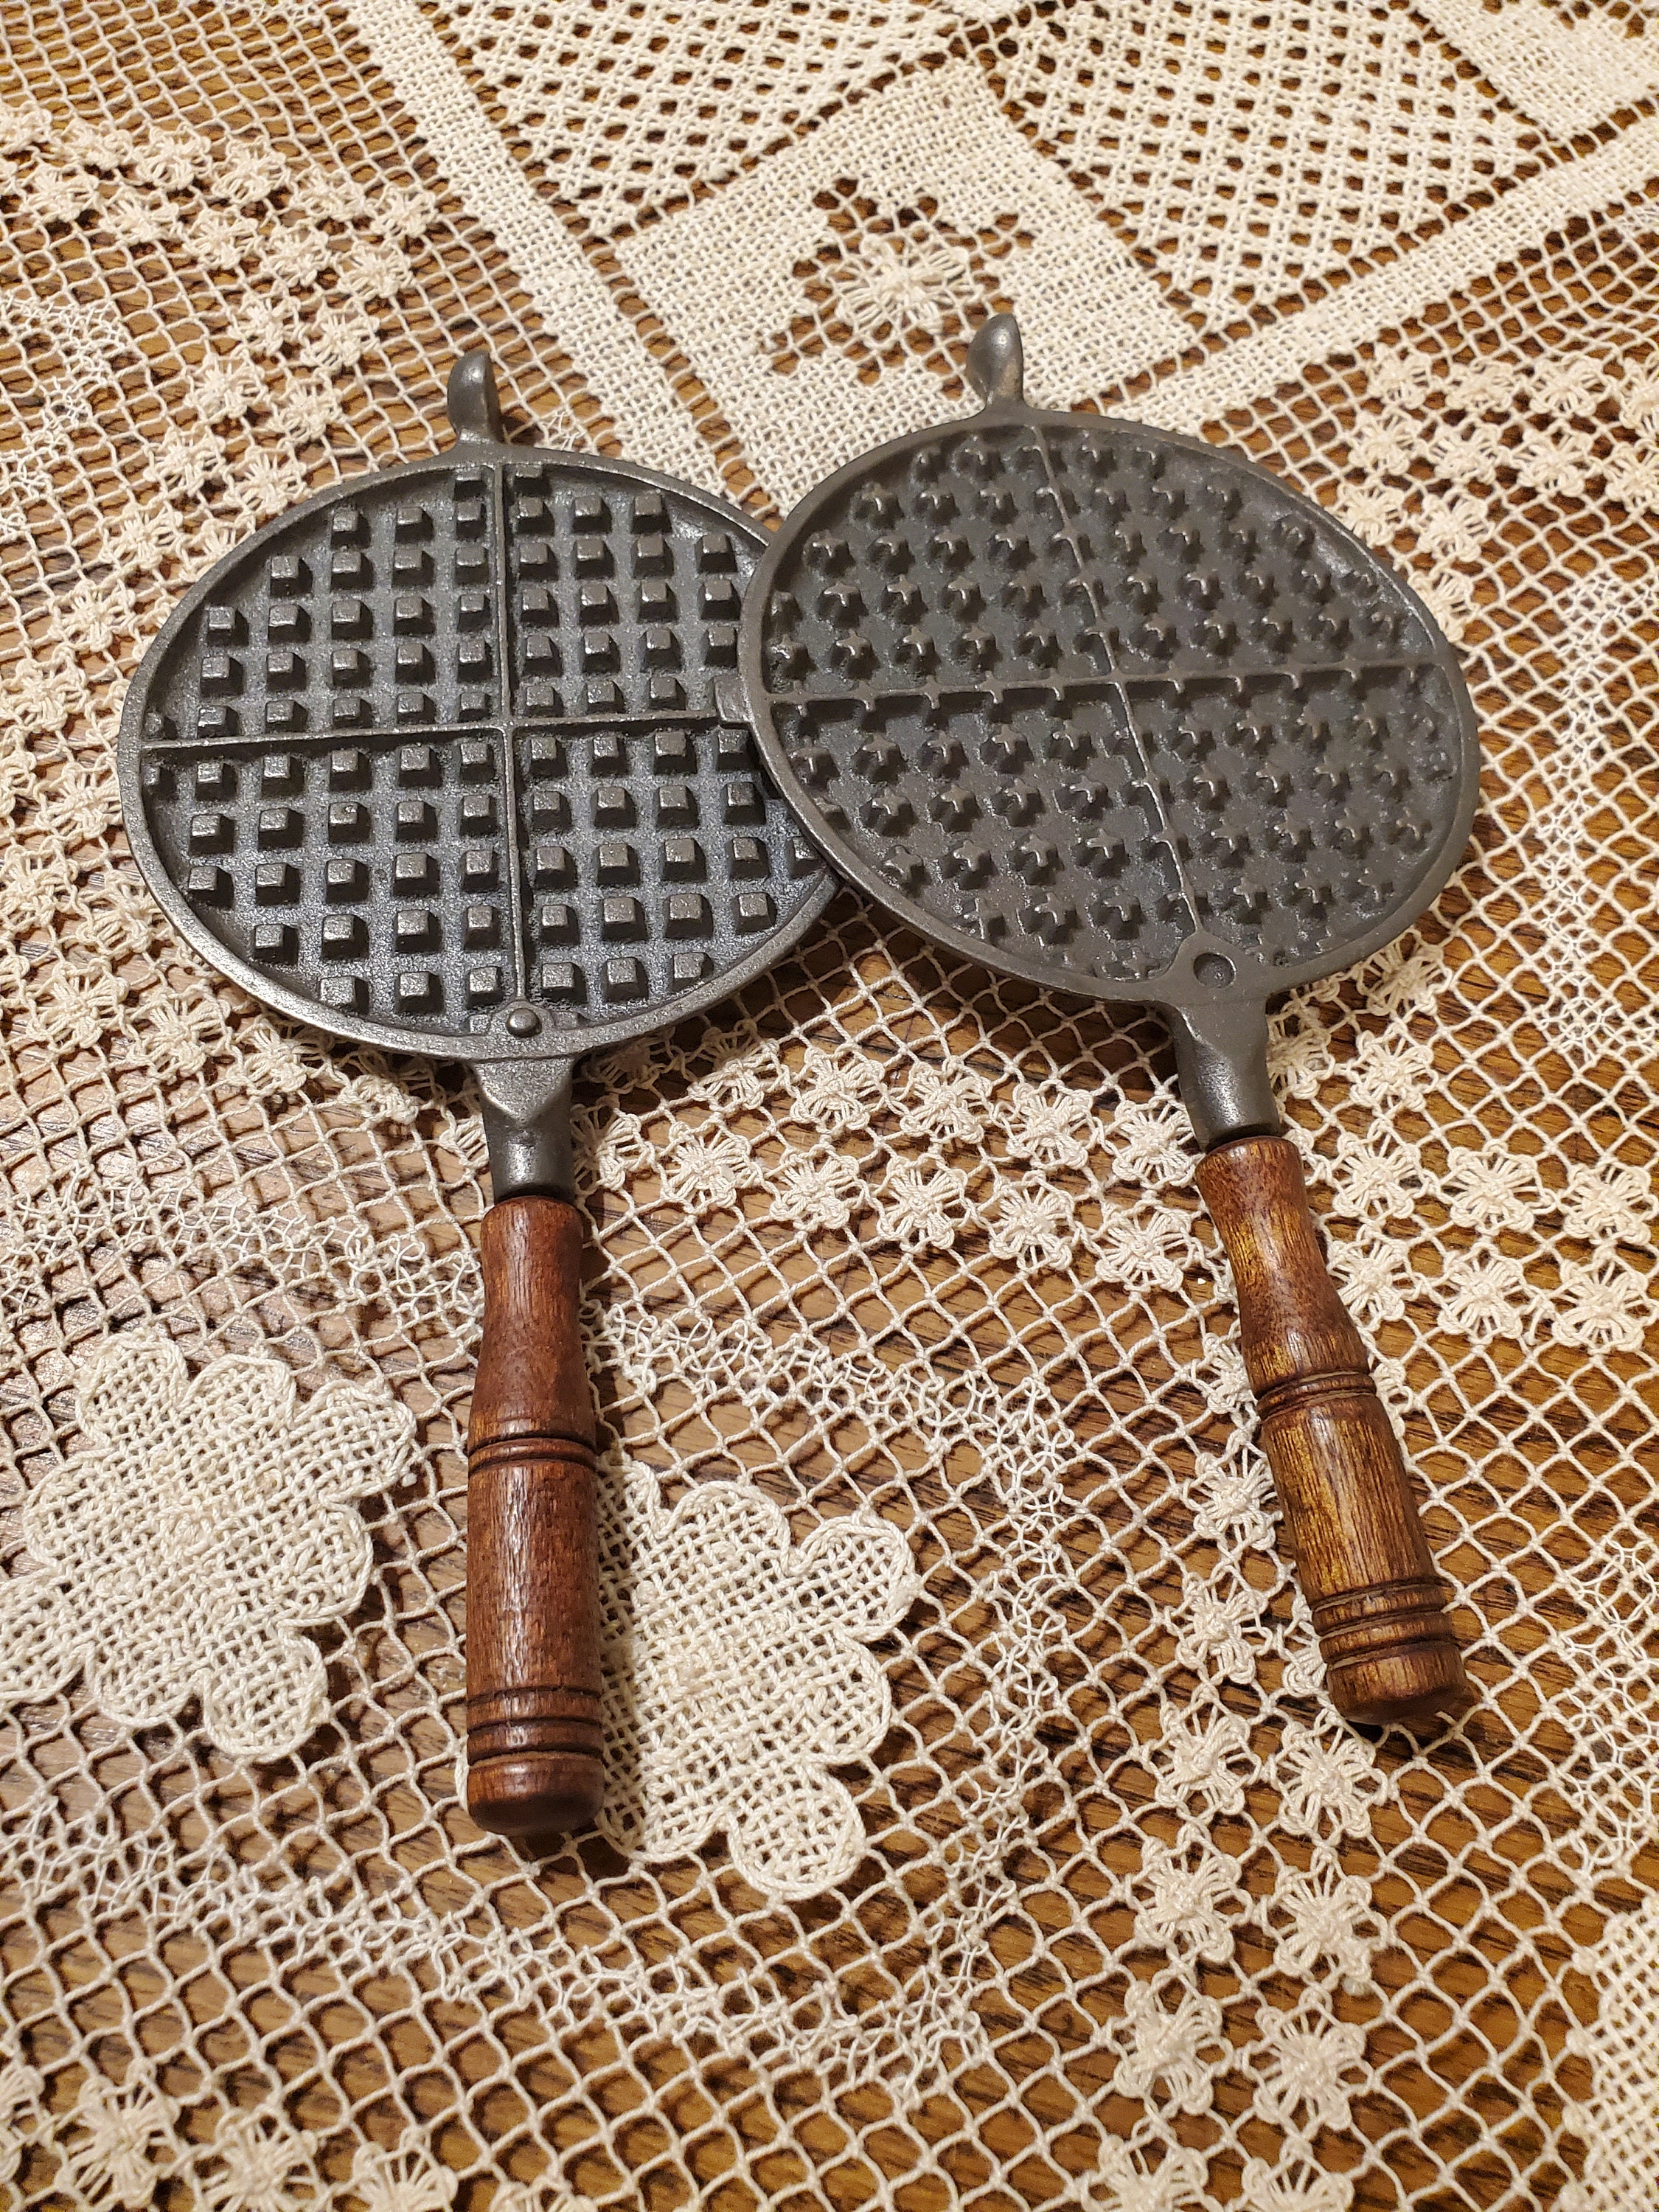 Cast Iron Stover Waffle Iron for Sale in Phoenix, AZ - OfferUp